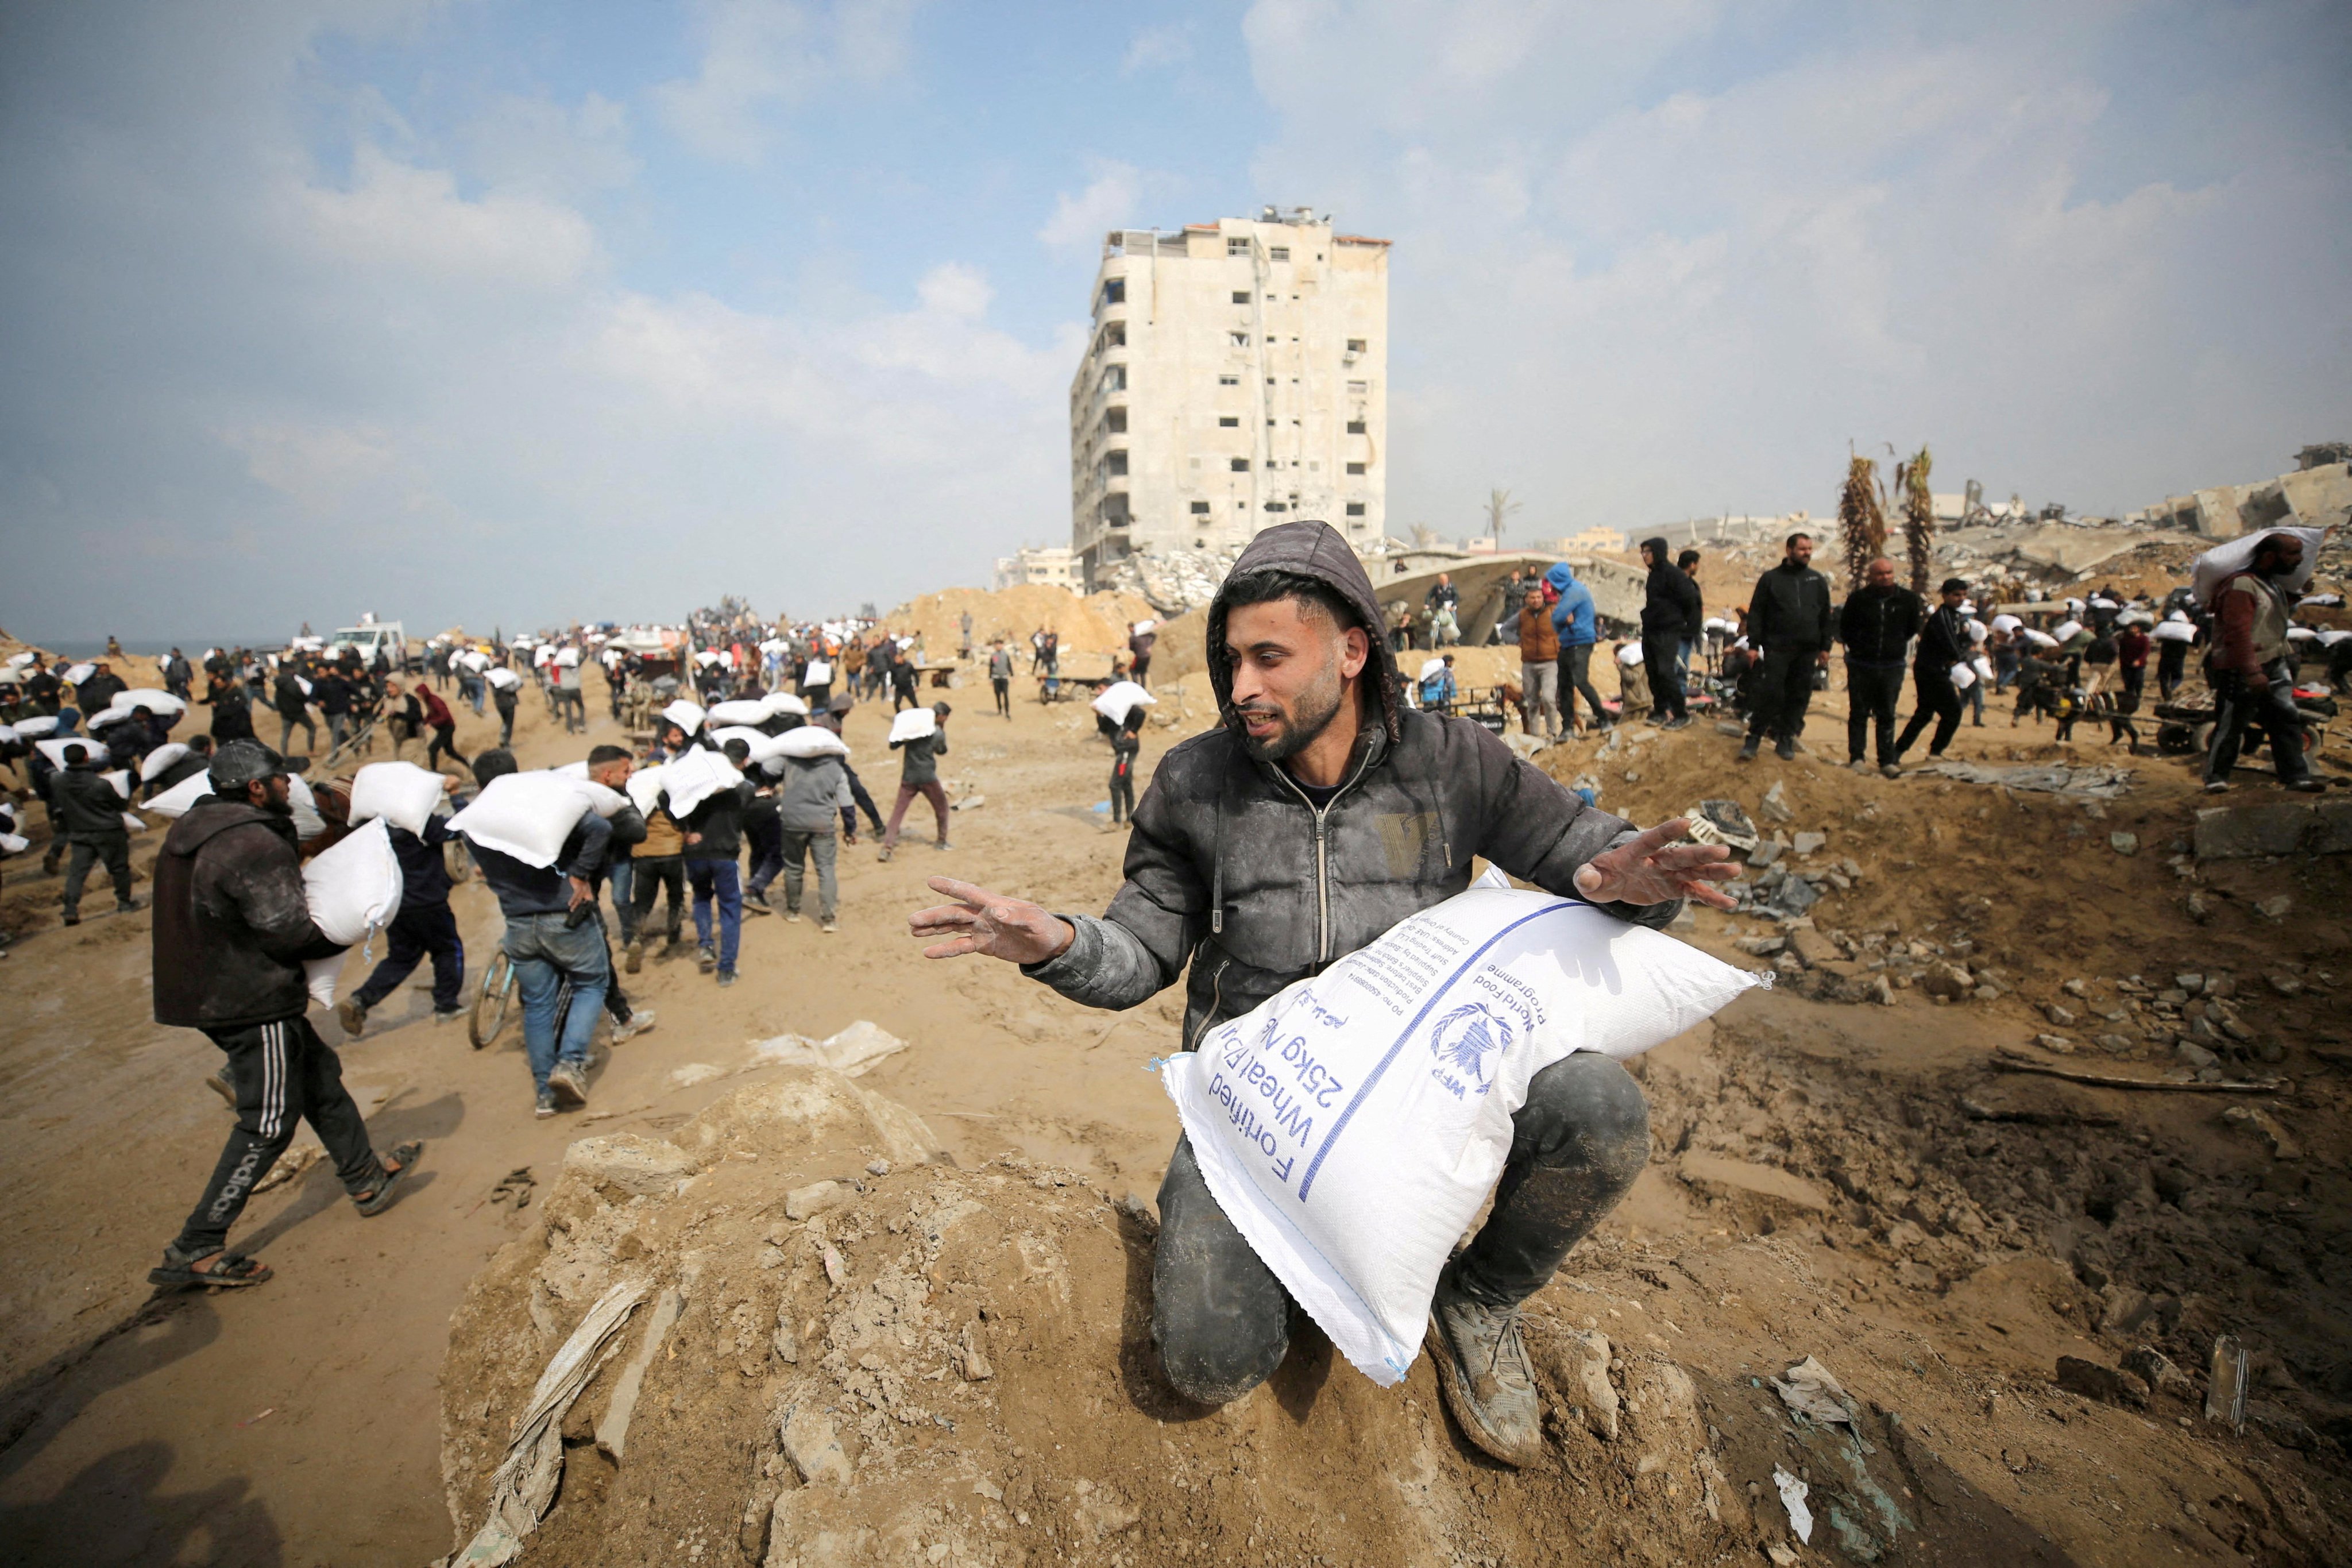 Palestinians carry bags of flour from an aid truck near an Israeli checkpoint on February 19. Photo: Reuters